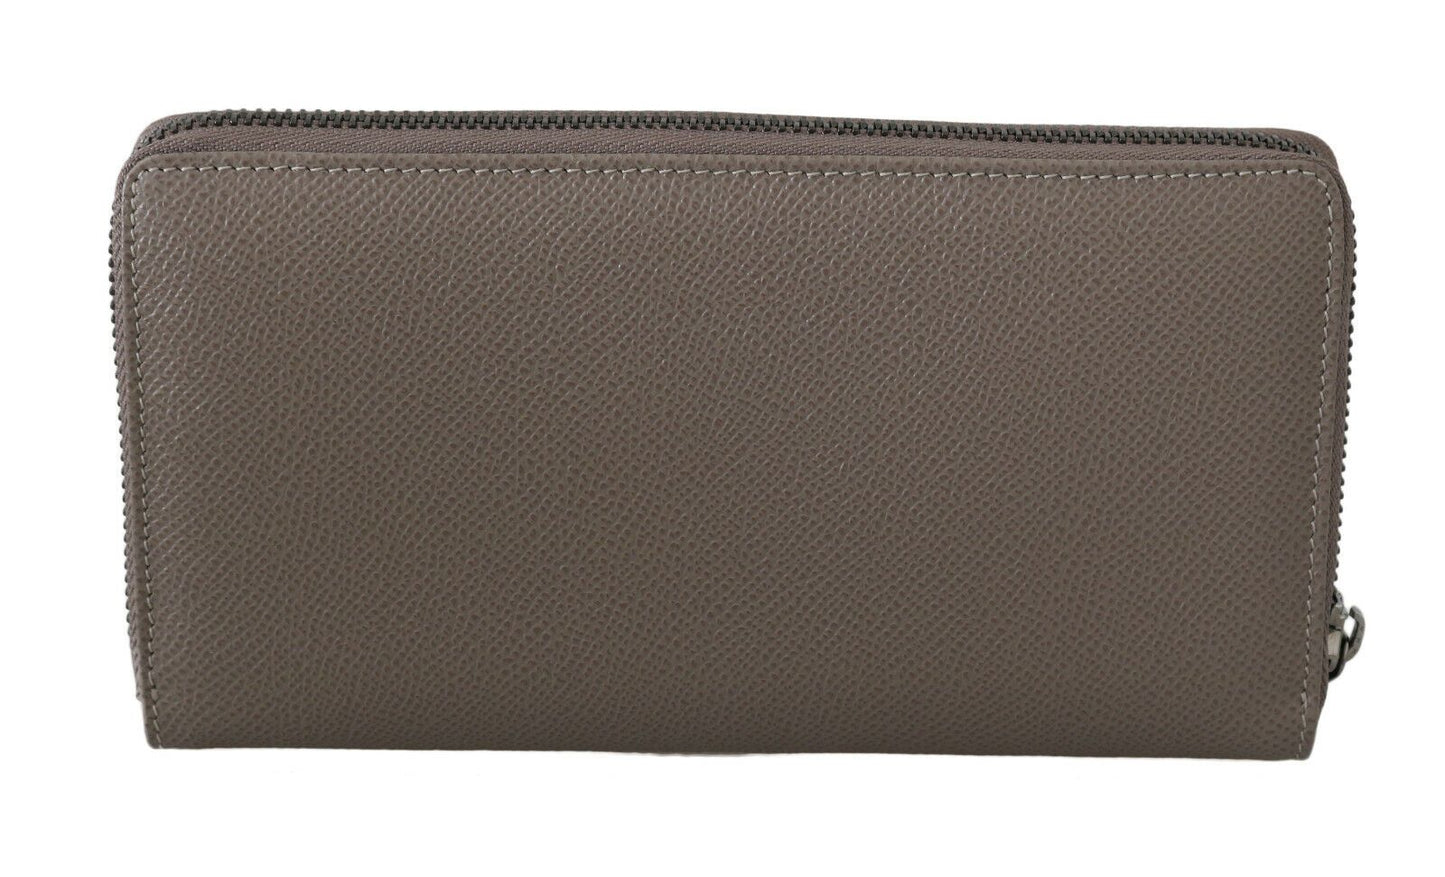 a brown leather wallet with a zipper